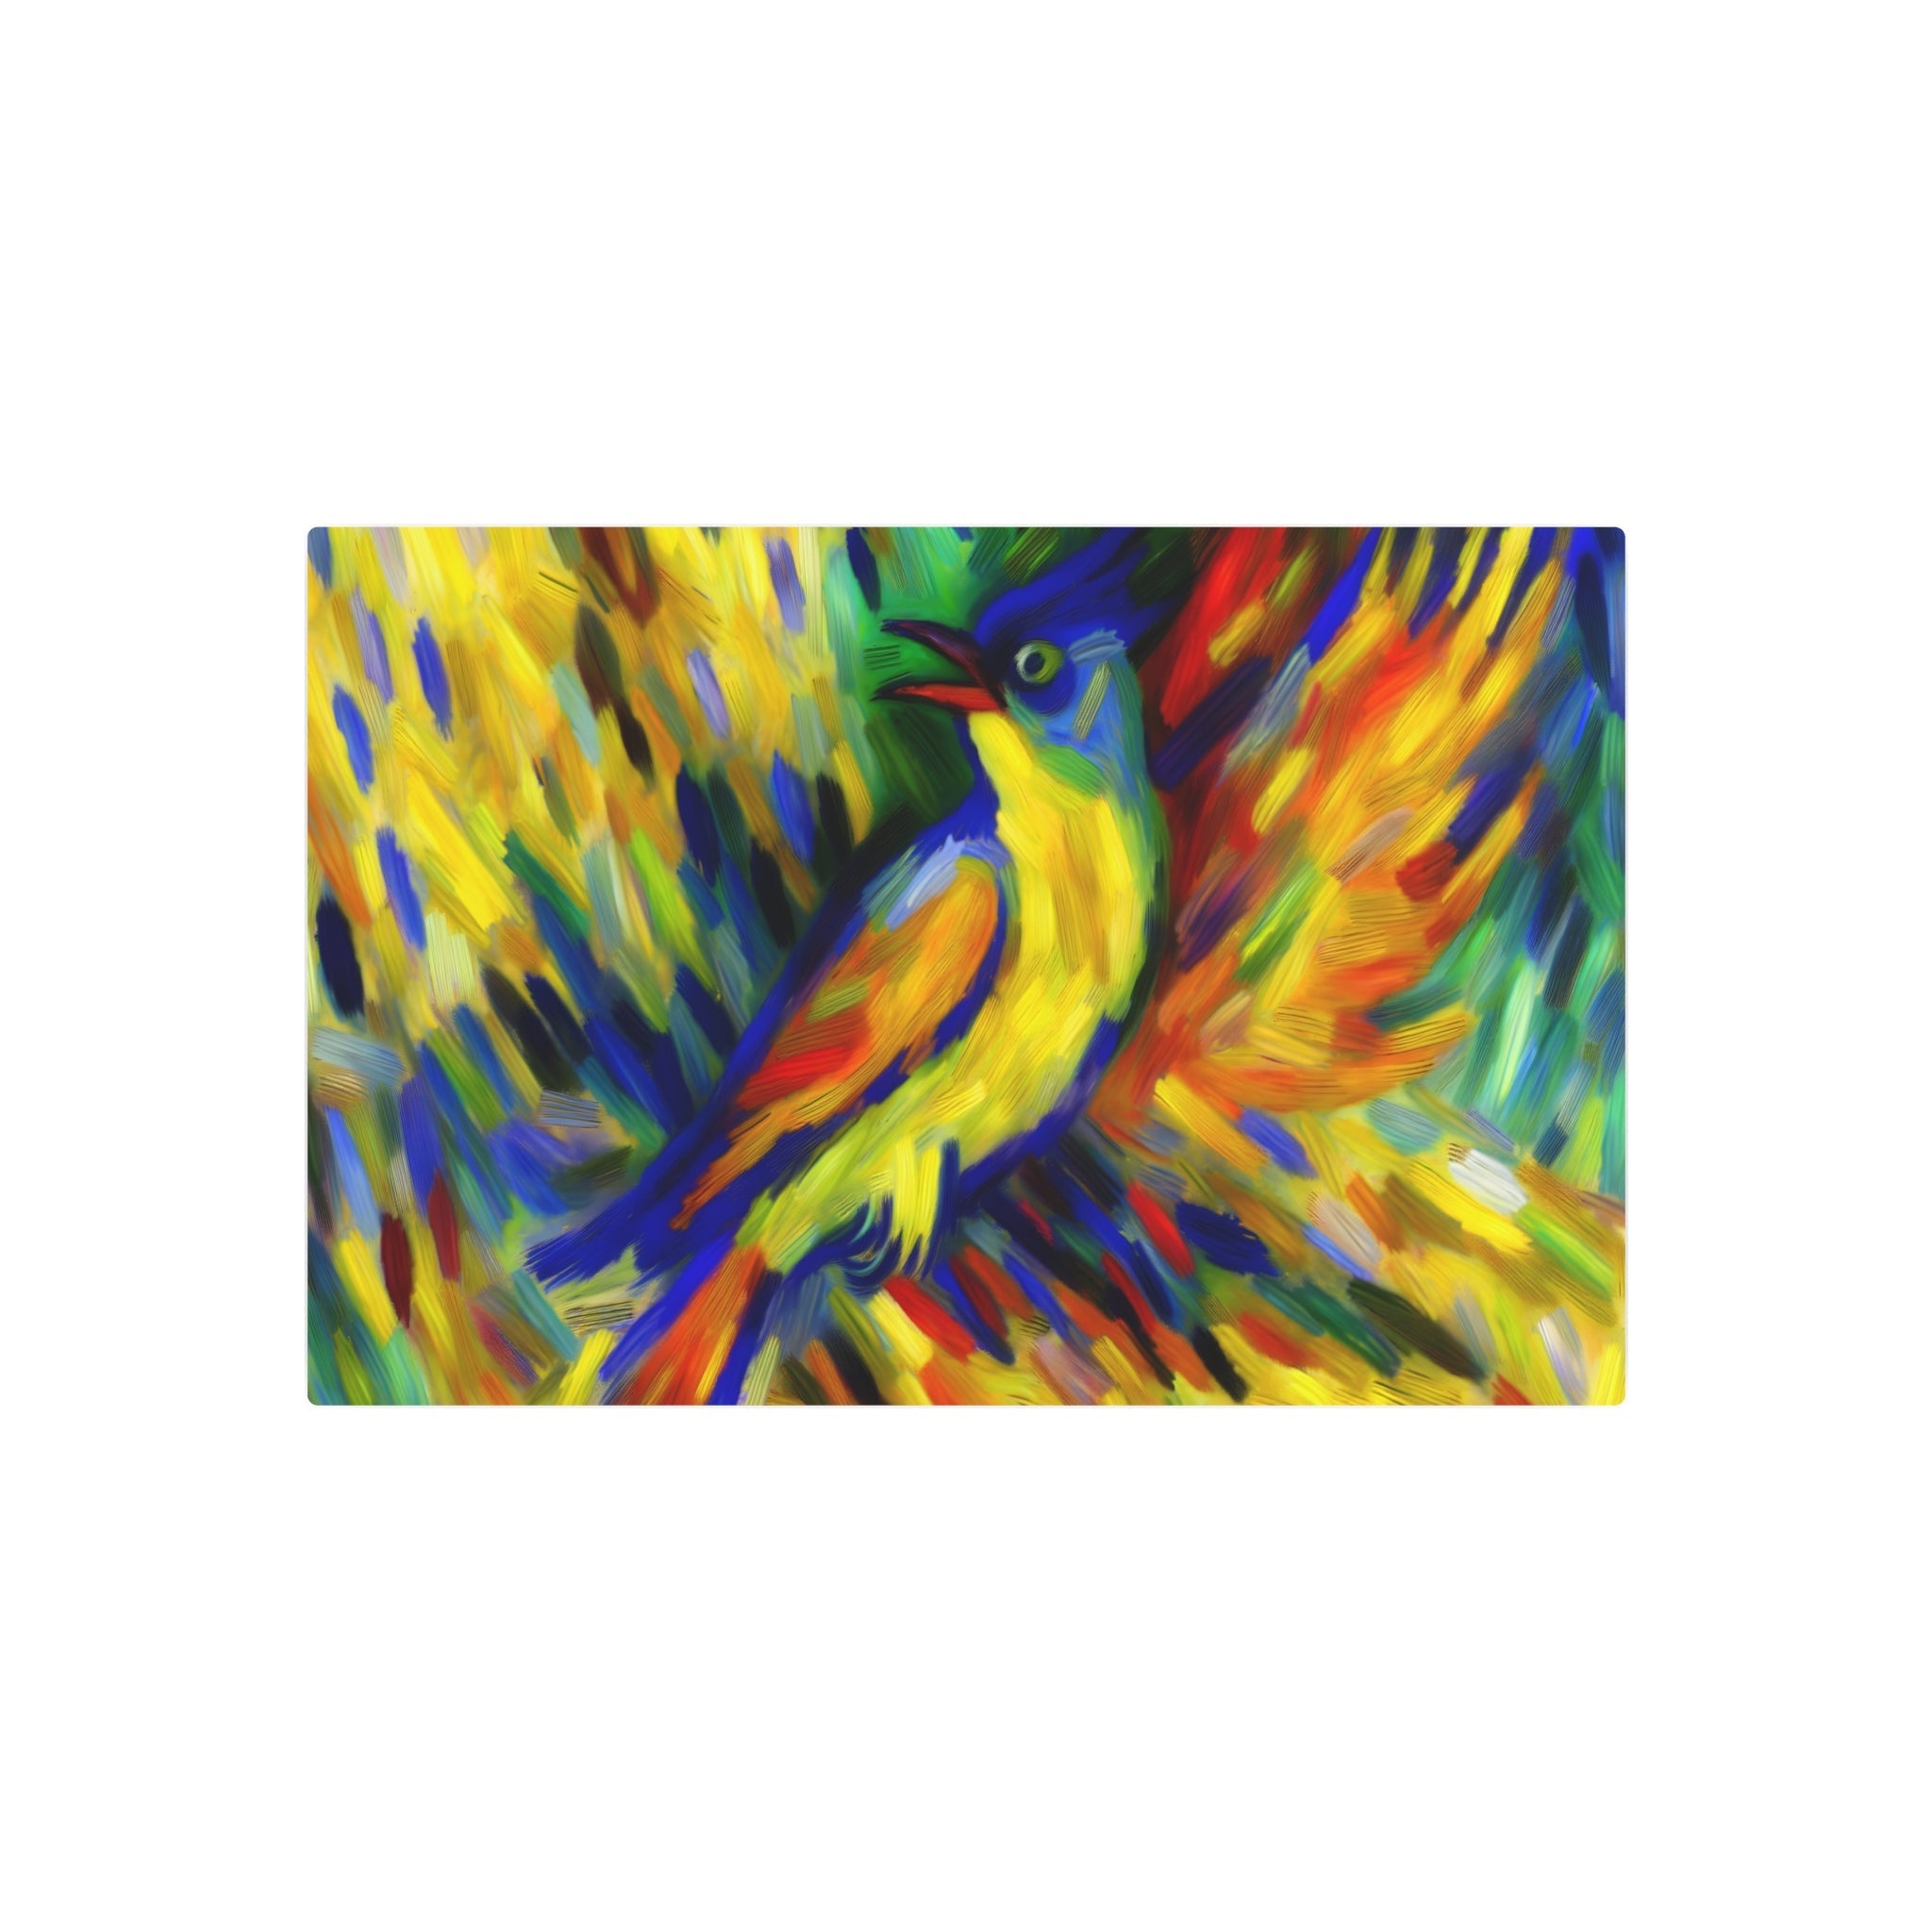 Metal Poster Art | "Expressionism Western Art Style - Vibrant Bird Scene with Intense Colors and Overstated Strokes" - Metal Poster Art 30″ x 20″ (Horizontal) 0.12''